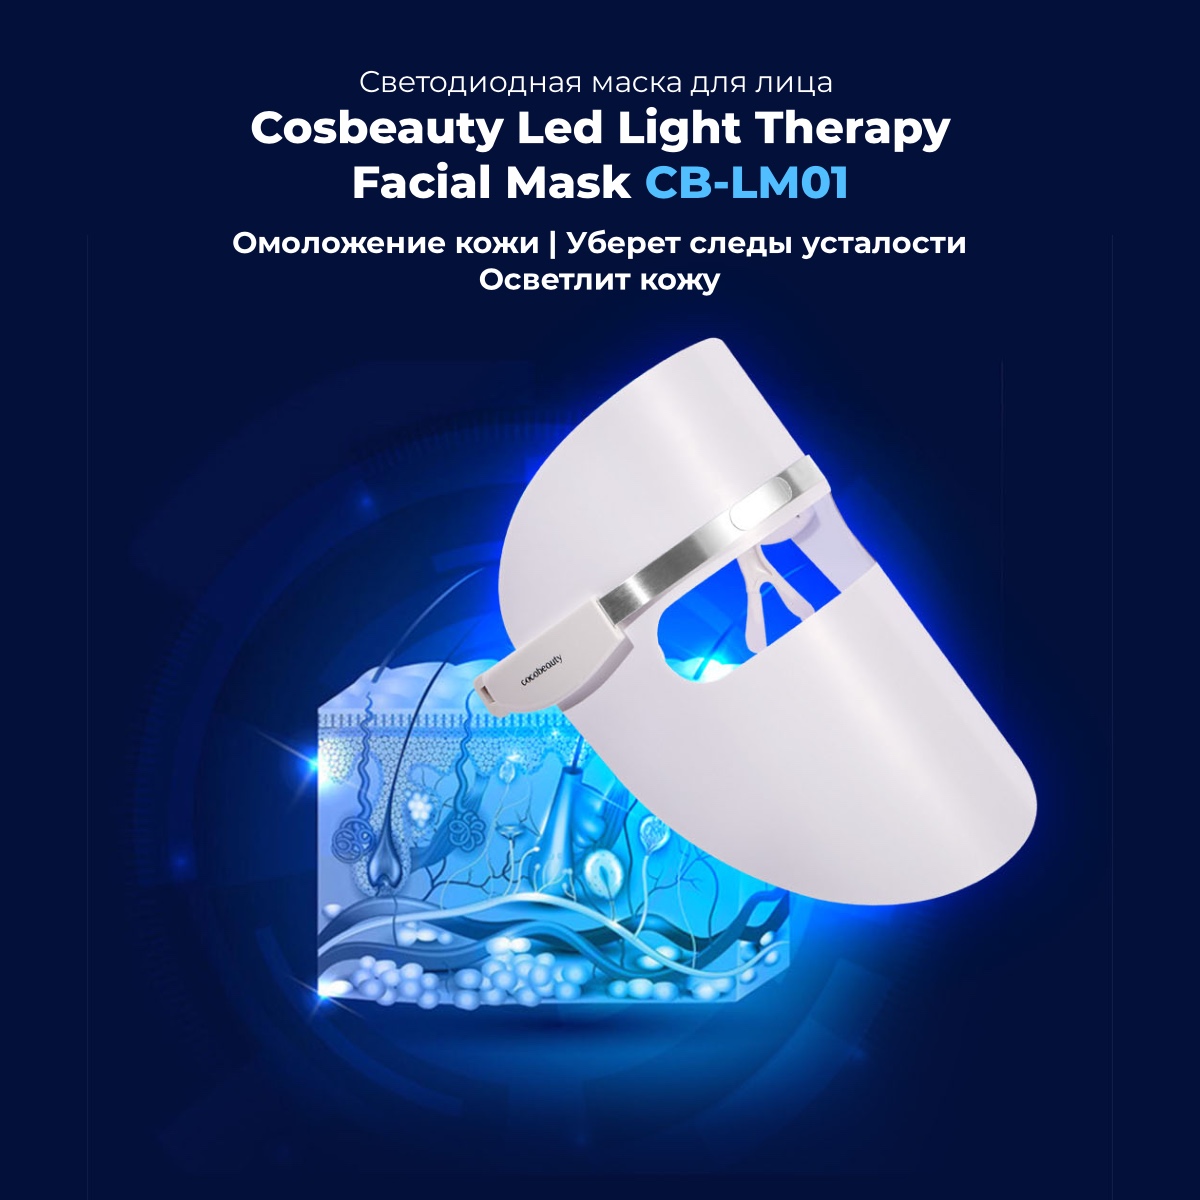 Cosbeauty-Led-Light-Therapy-Facial-Mask-CB-LM01-01